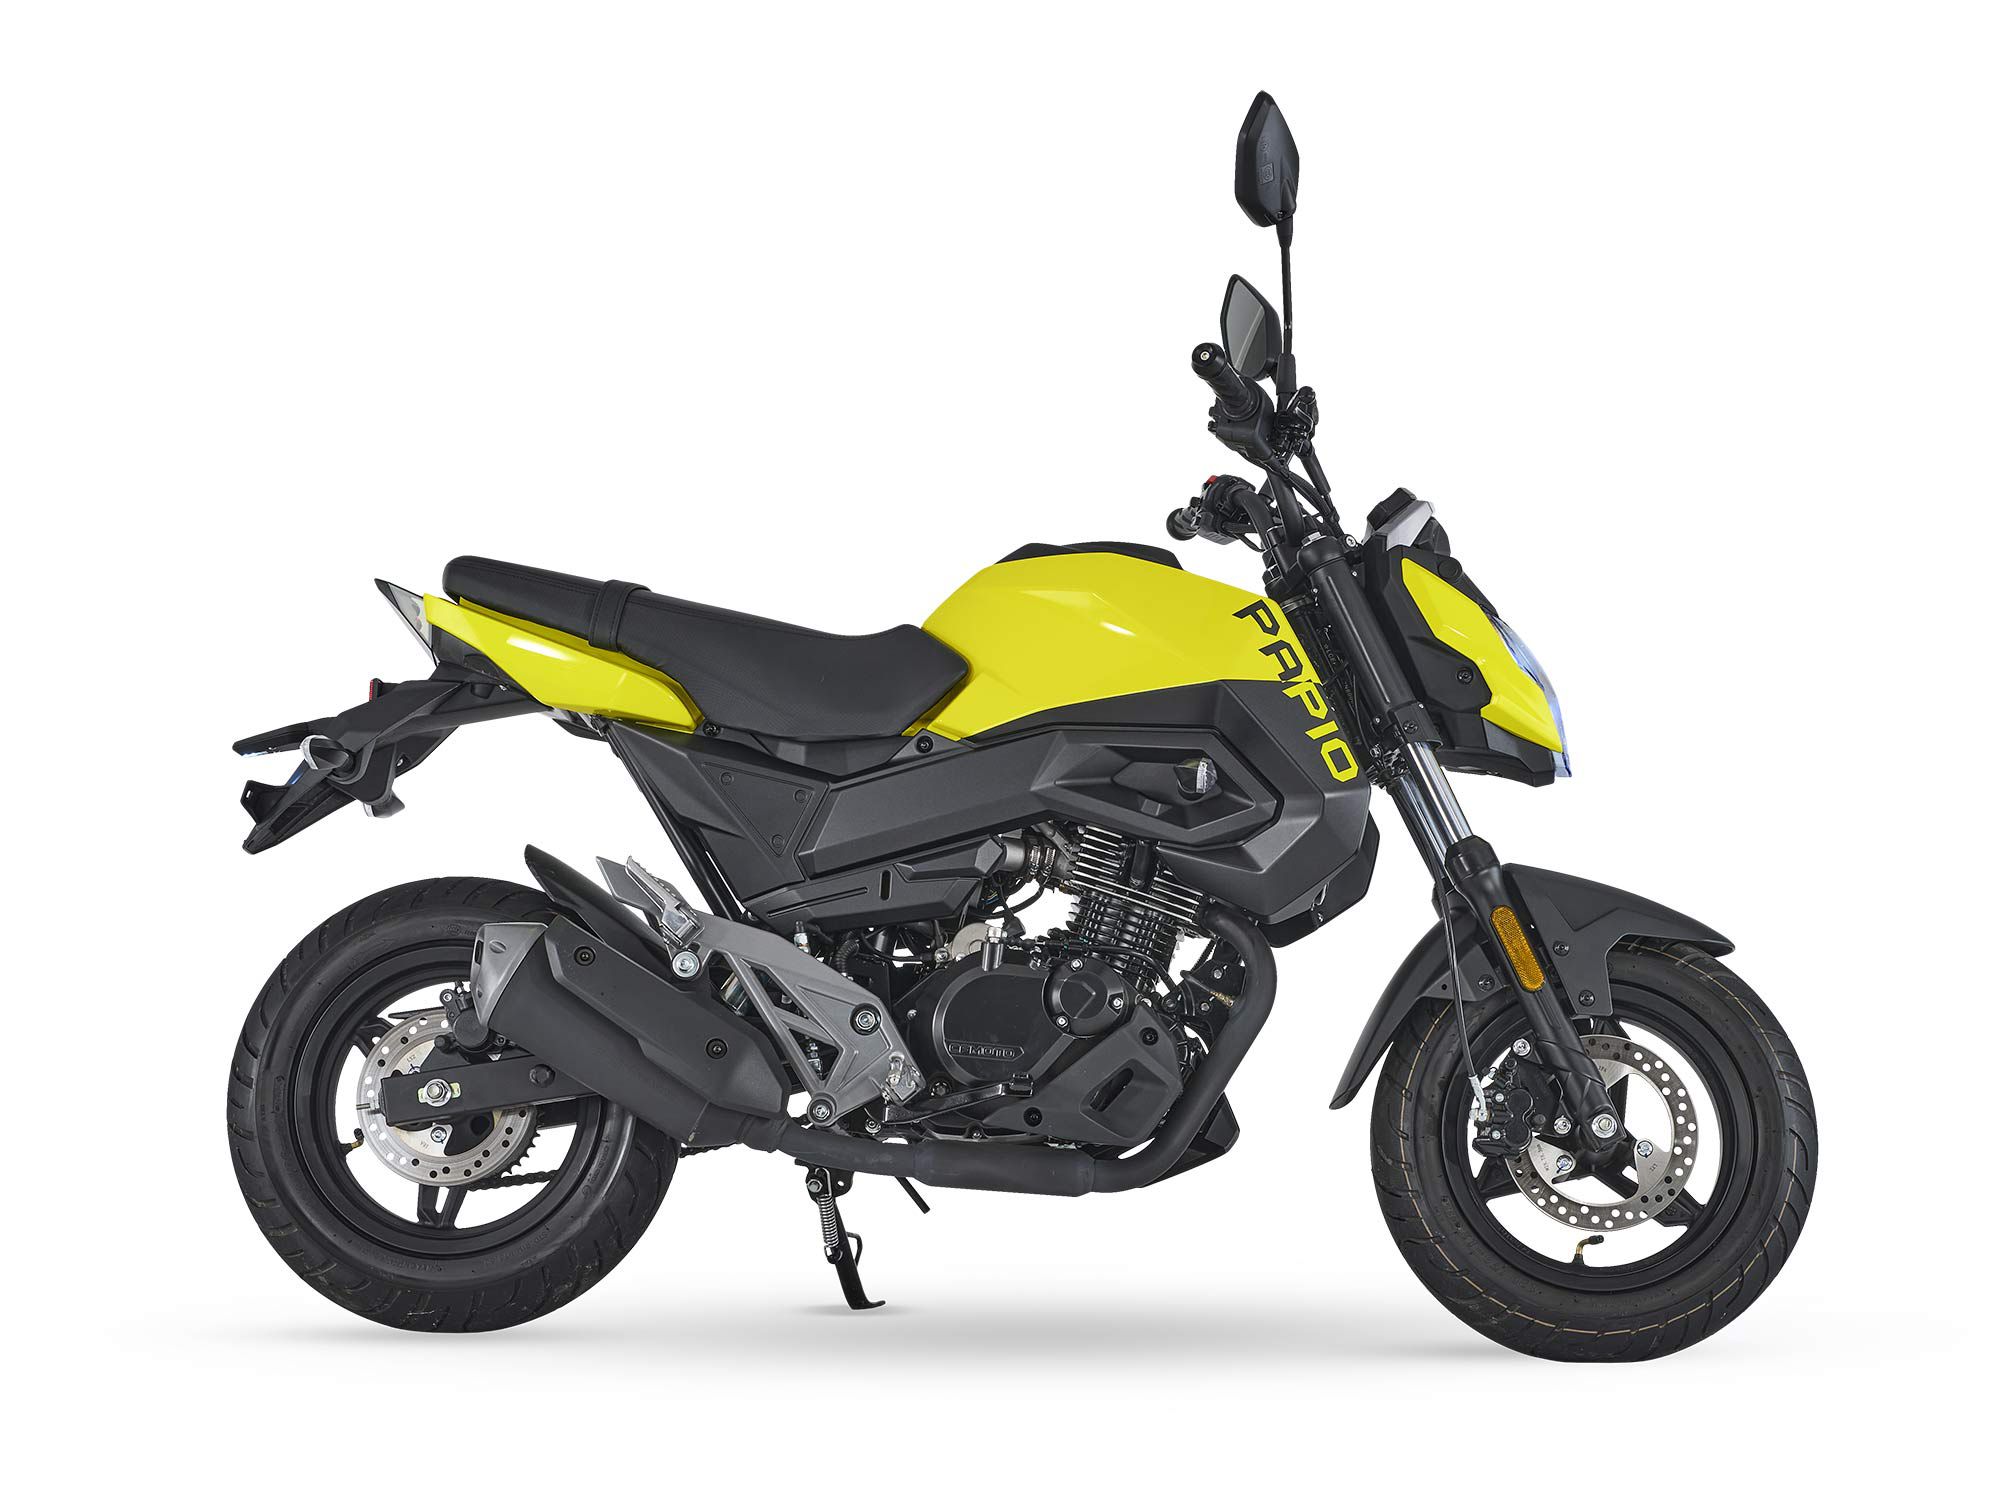 The CFMOTO Papio goes head to head against Honda’s Grom and Kawasaki’s Z125 Pro in the mini streetbike category.